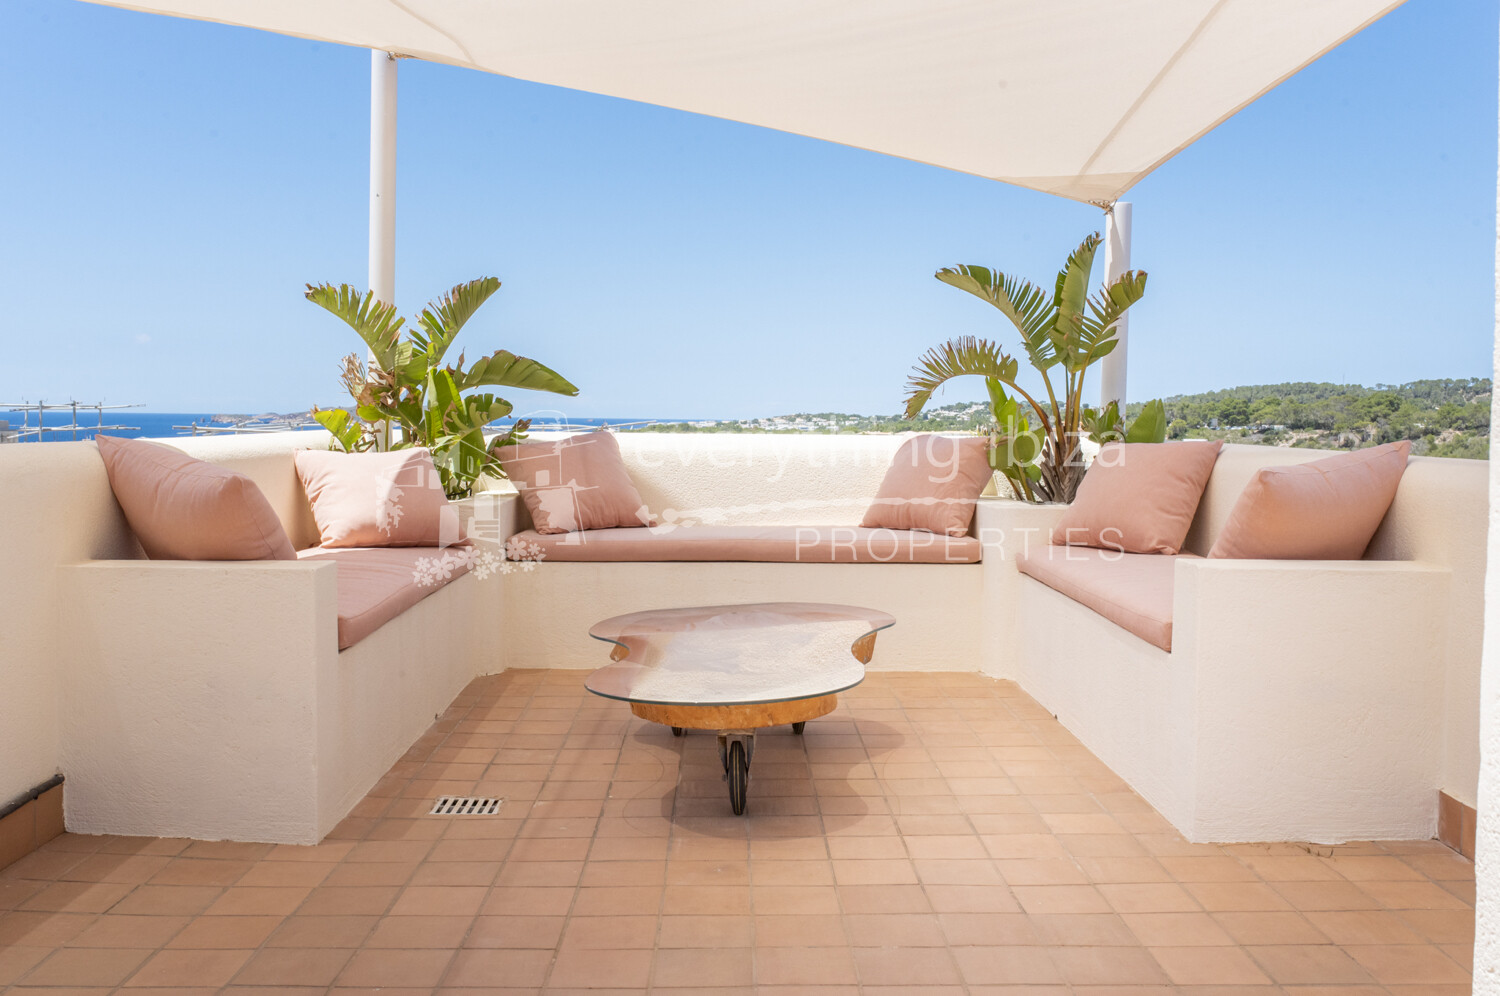 Detached House with Tourist License and Elevated Sea Views Cala Tarida, ref. 1649, for sale in Ibiza by everything ibiza Properties